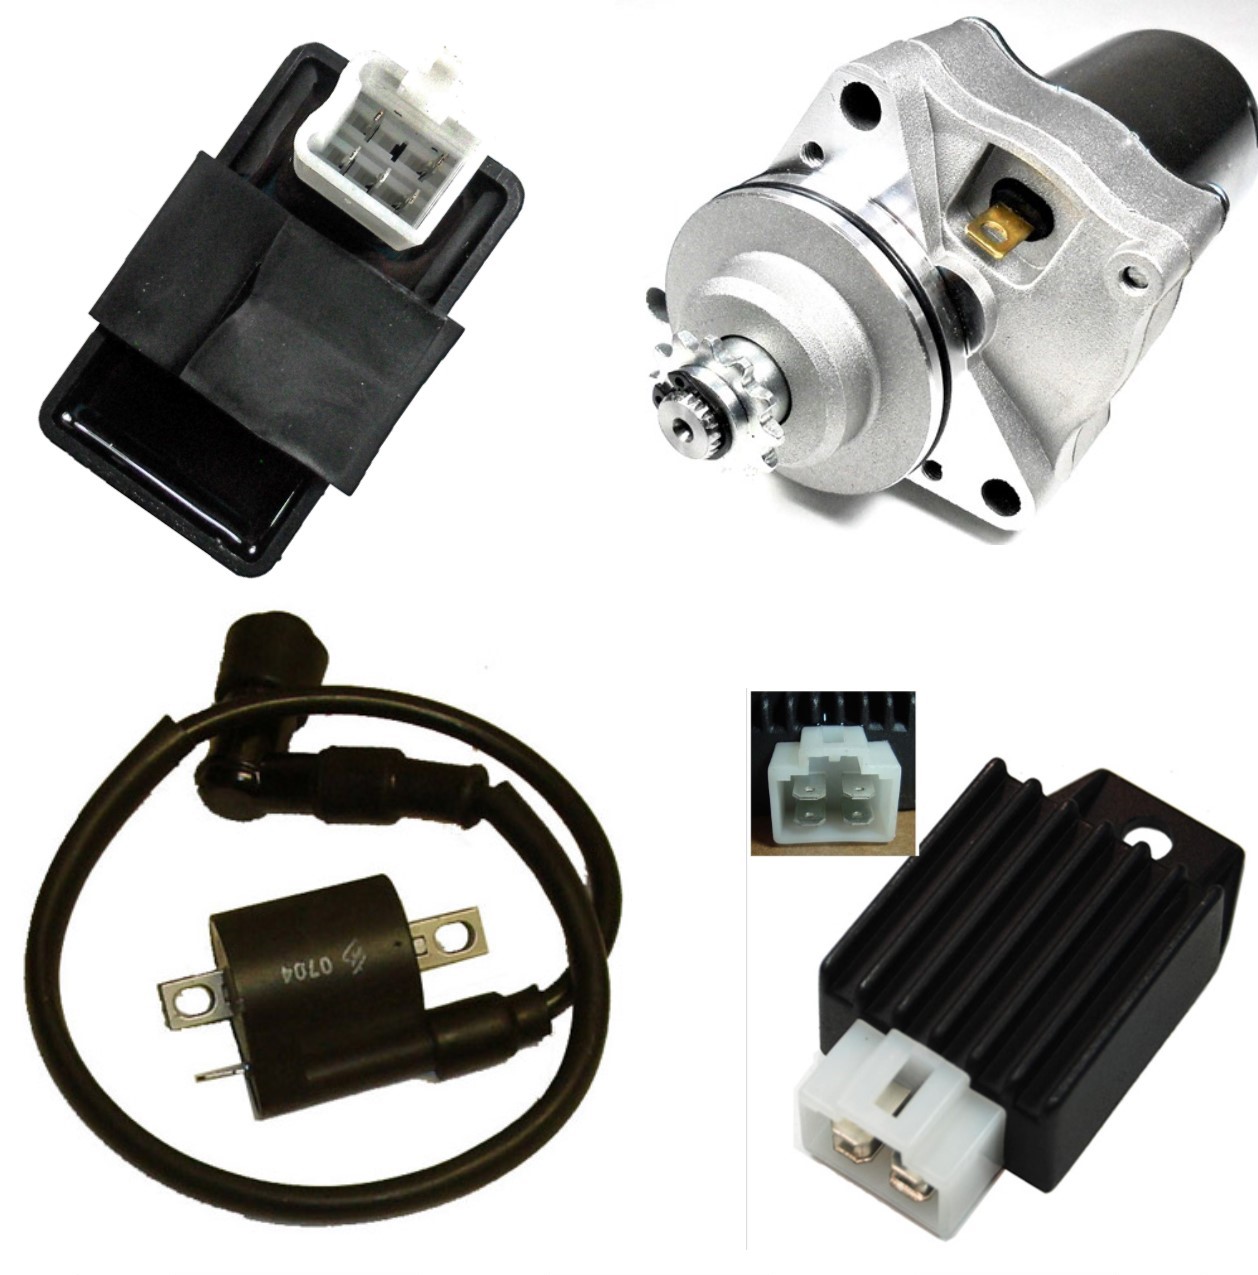 Electrical Parts Starters-CDI-Coils-Relays-Stators 110cc ATV-Dirtbikes